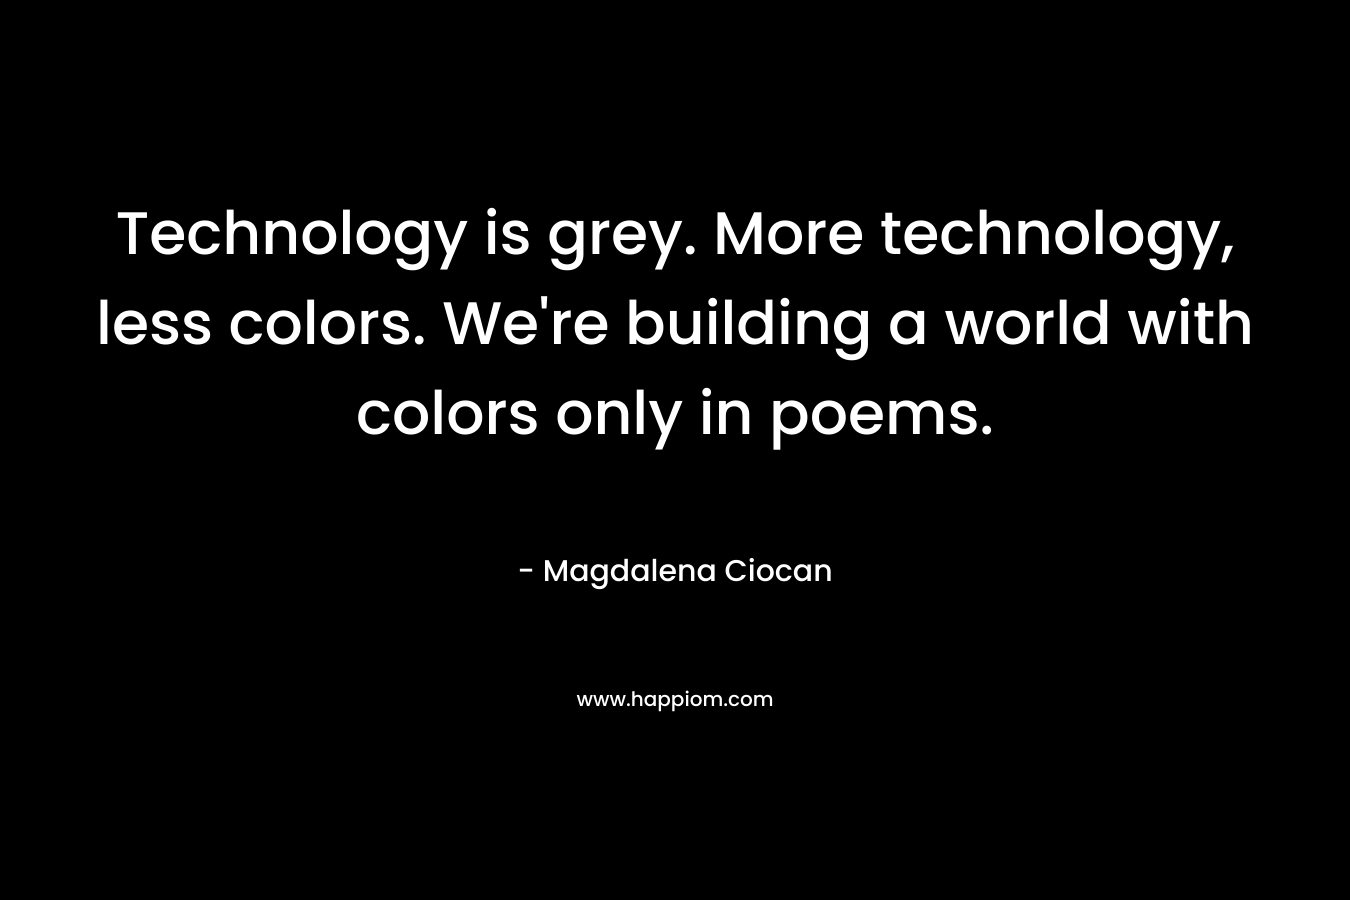 Technology is grey. More technology, less colors. We’re building a world with colors only in poems. – Magdalena Ciocan